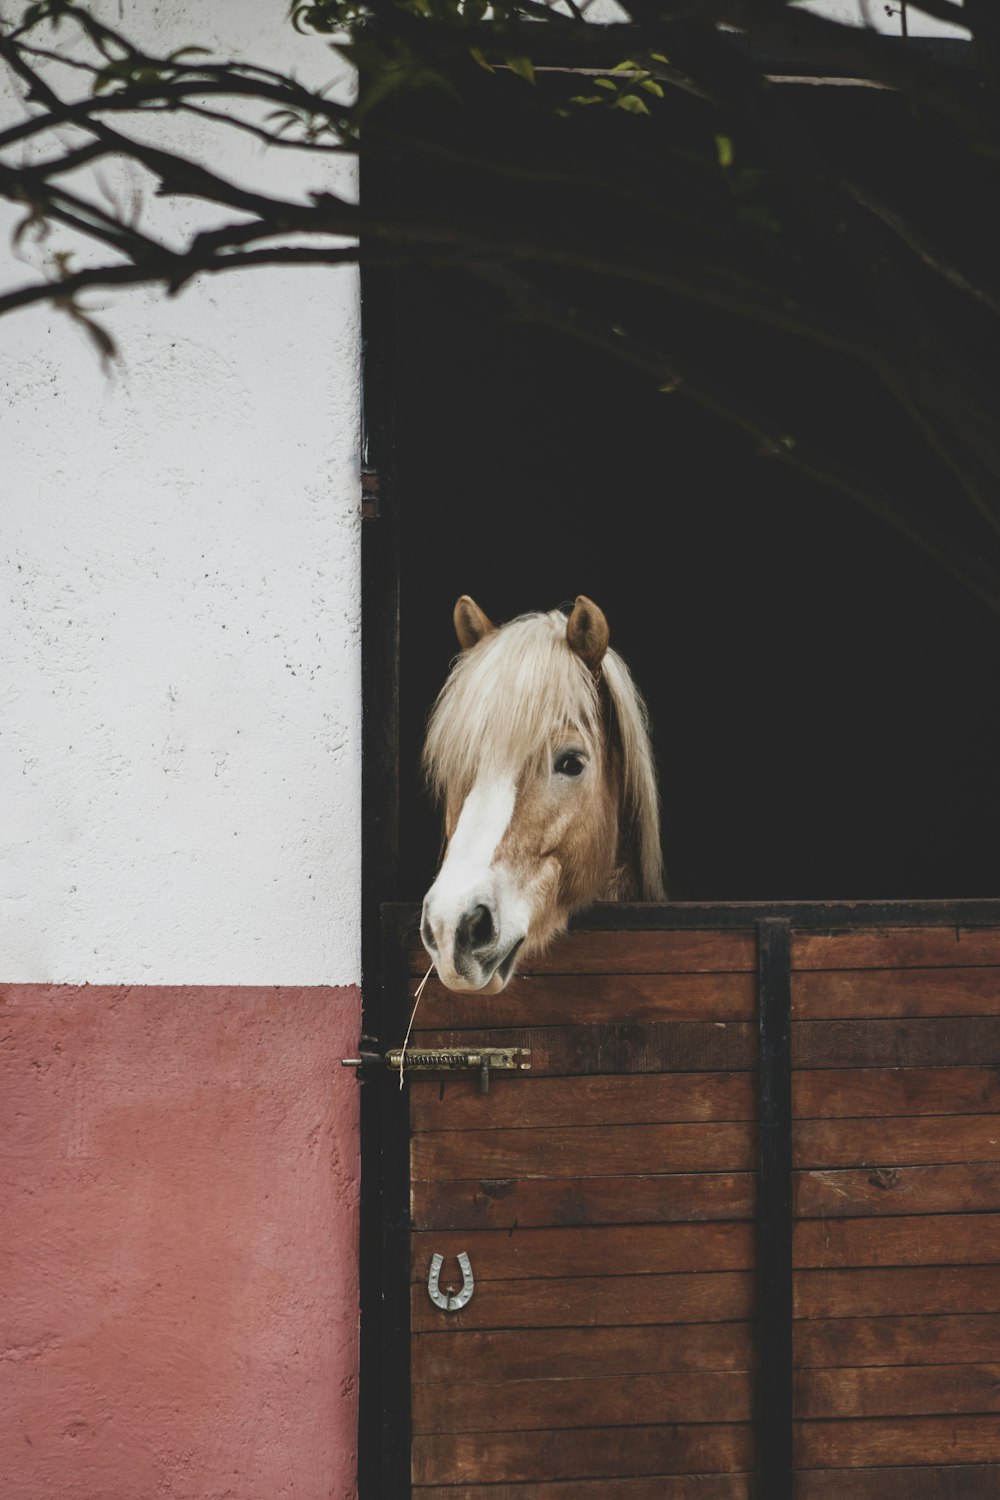 a brown and white horse sticking its head out of a window